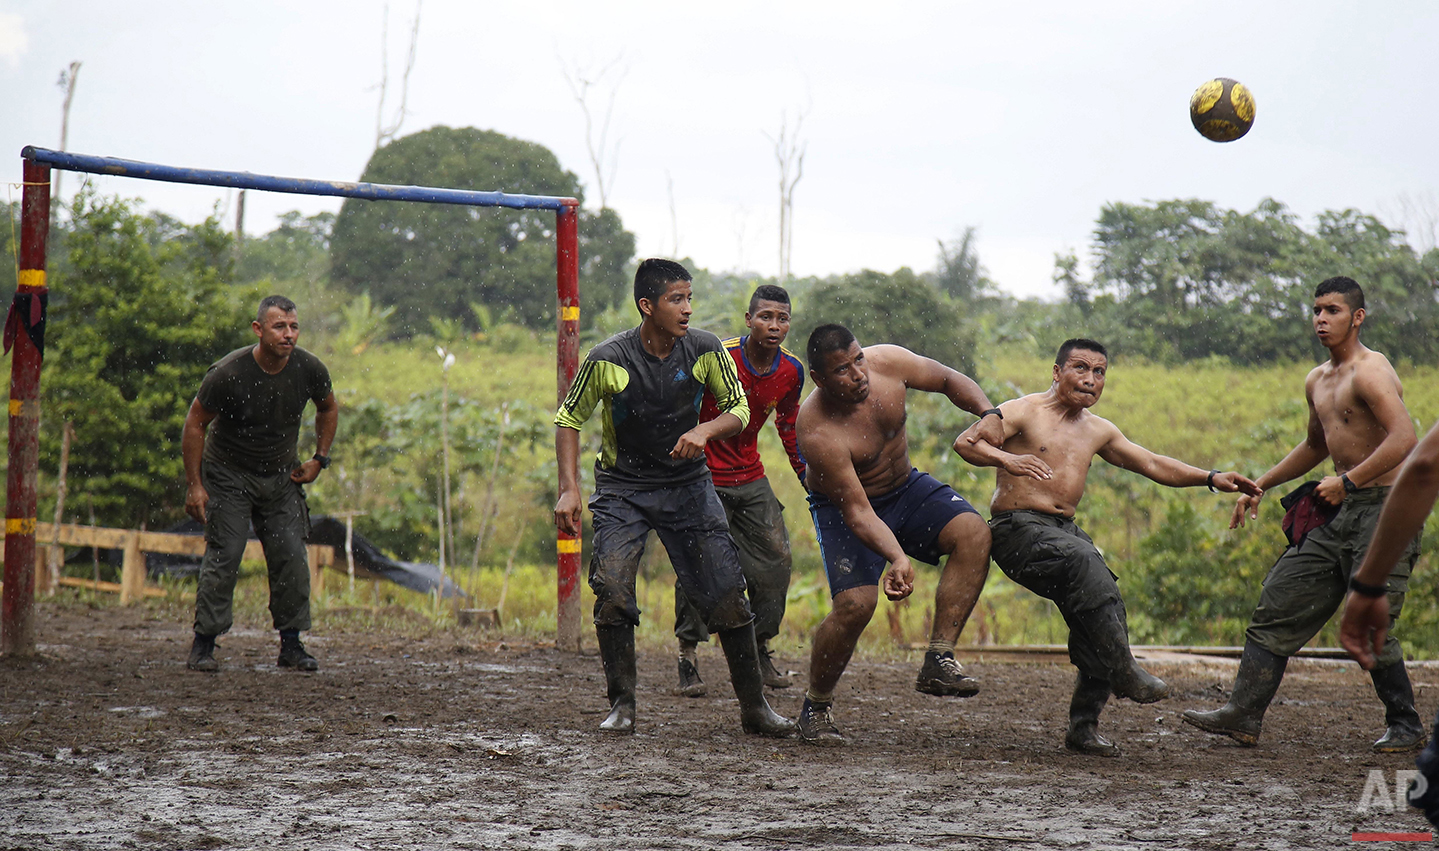  In this Aug. 11, 2016 photo, rebels of the 48th Front of the Revolutionary Armed Forces of Colombia, or FARC, play soccer at their camp in the southern jungles of Putumayo, Colombia. (AP Photo/Fernando Vergara)&nbsp; 